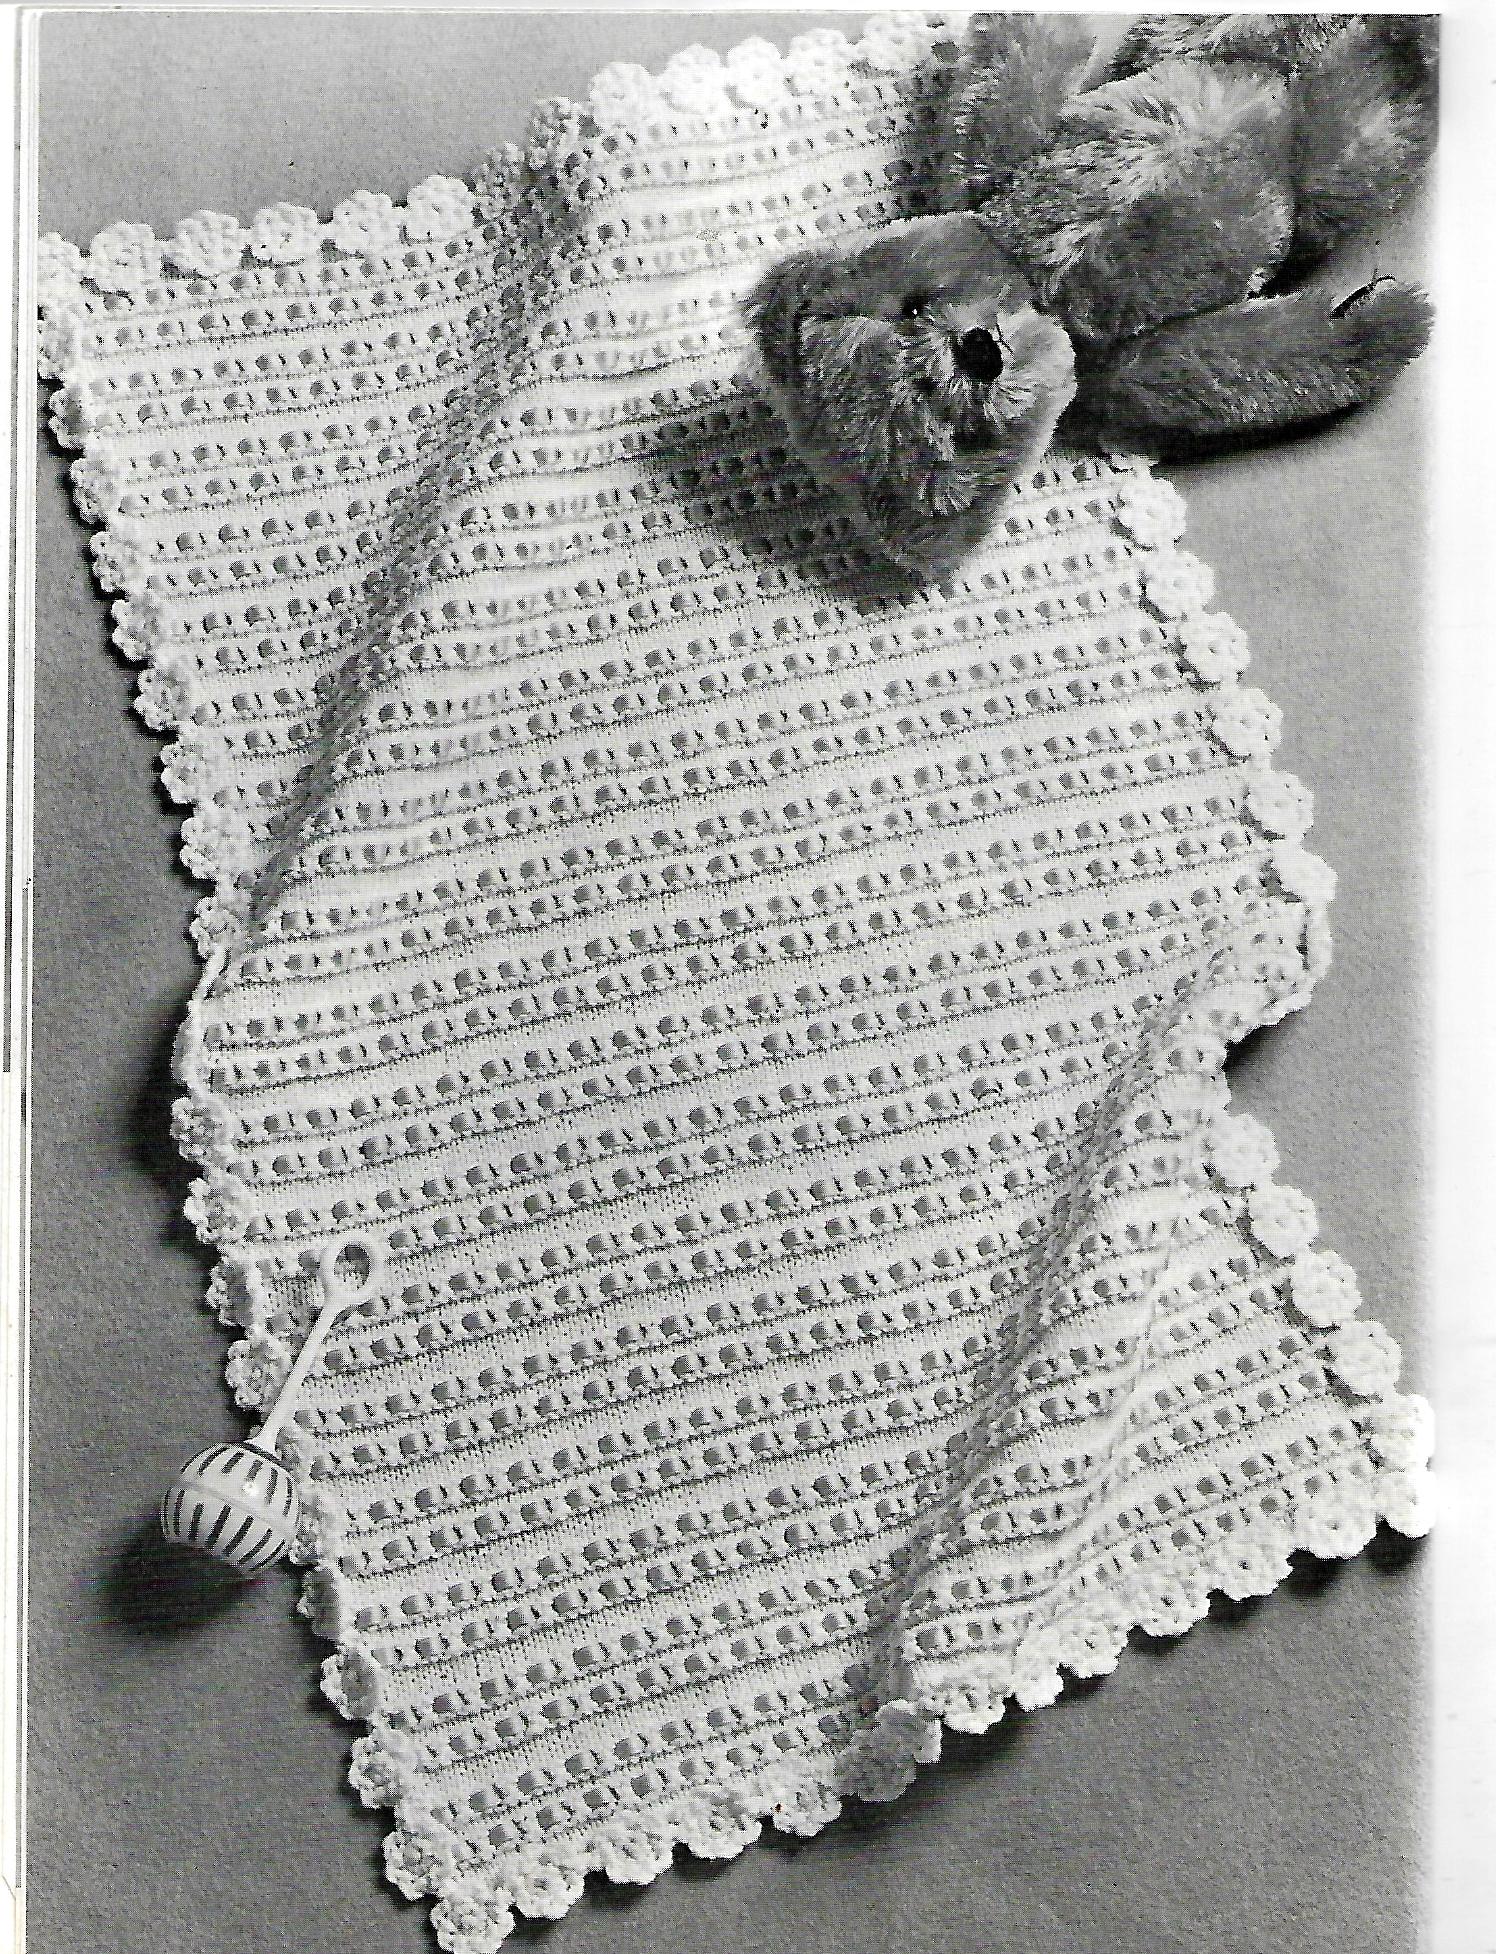 162 Patons Baby Knitting Pattern Book, 162 Beehive 2nd Easycare